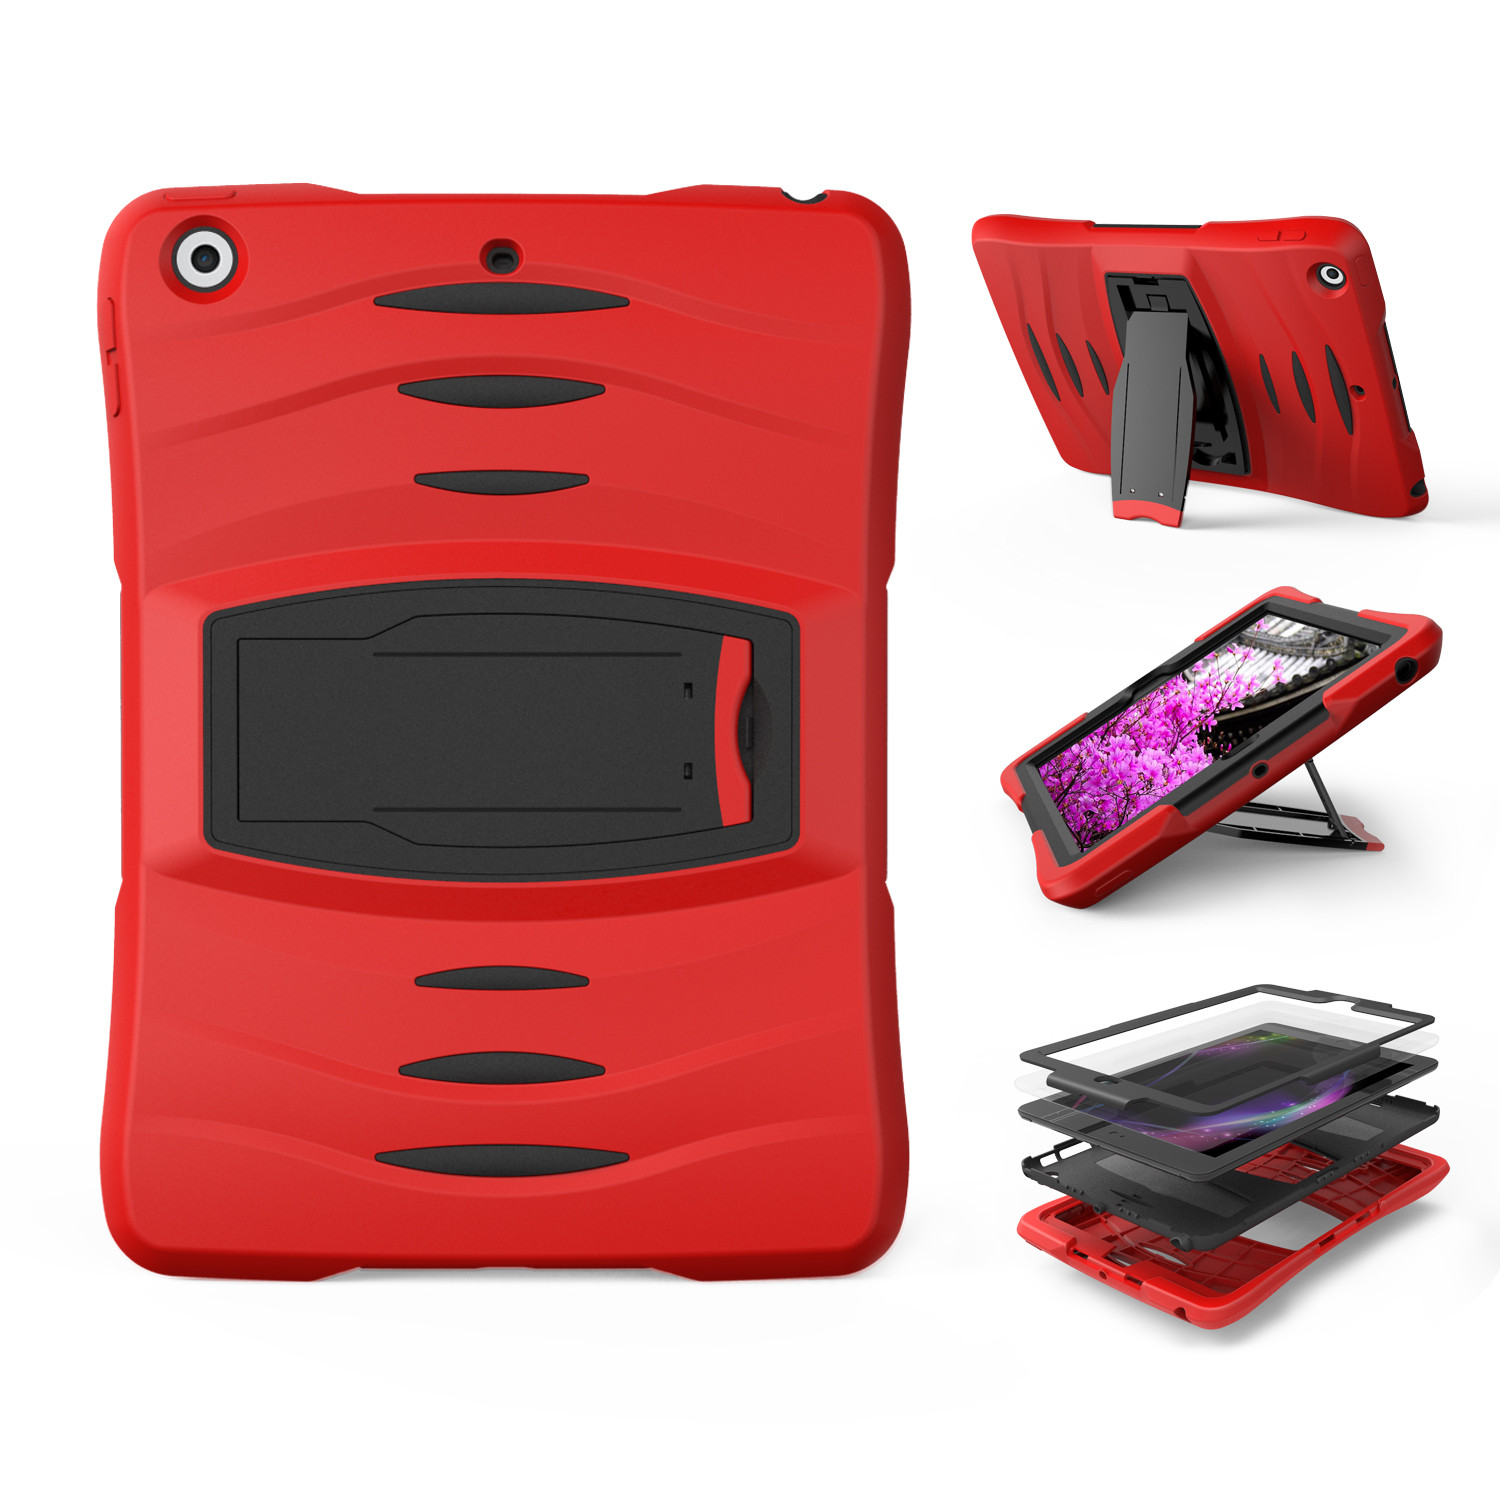 Tuff-Luv Armour Shield Case and Stand for Apple iPad - 9.7 inch, Red